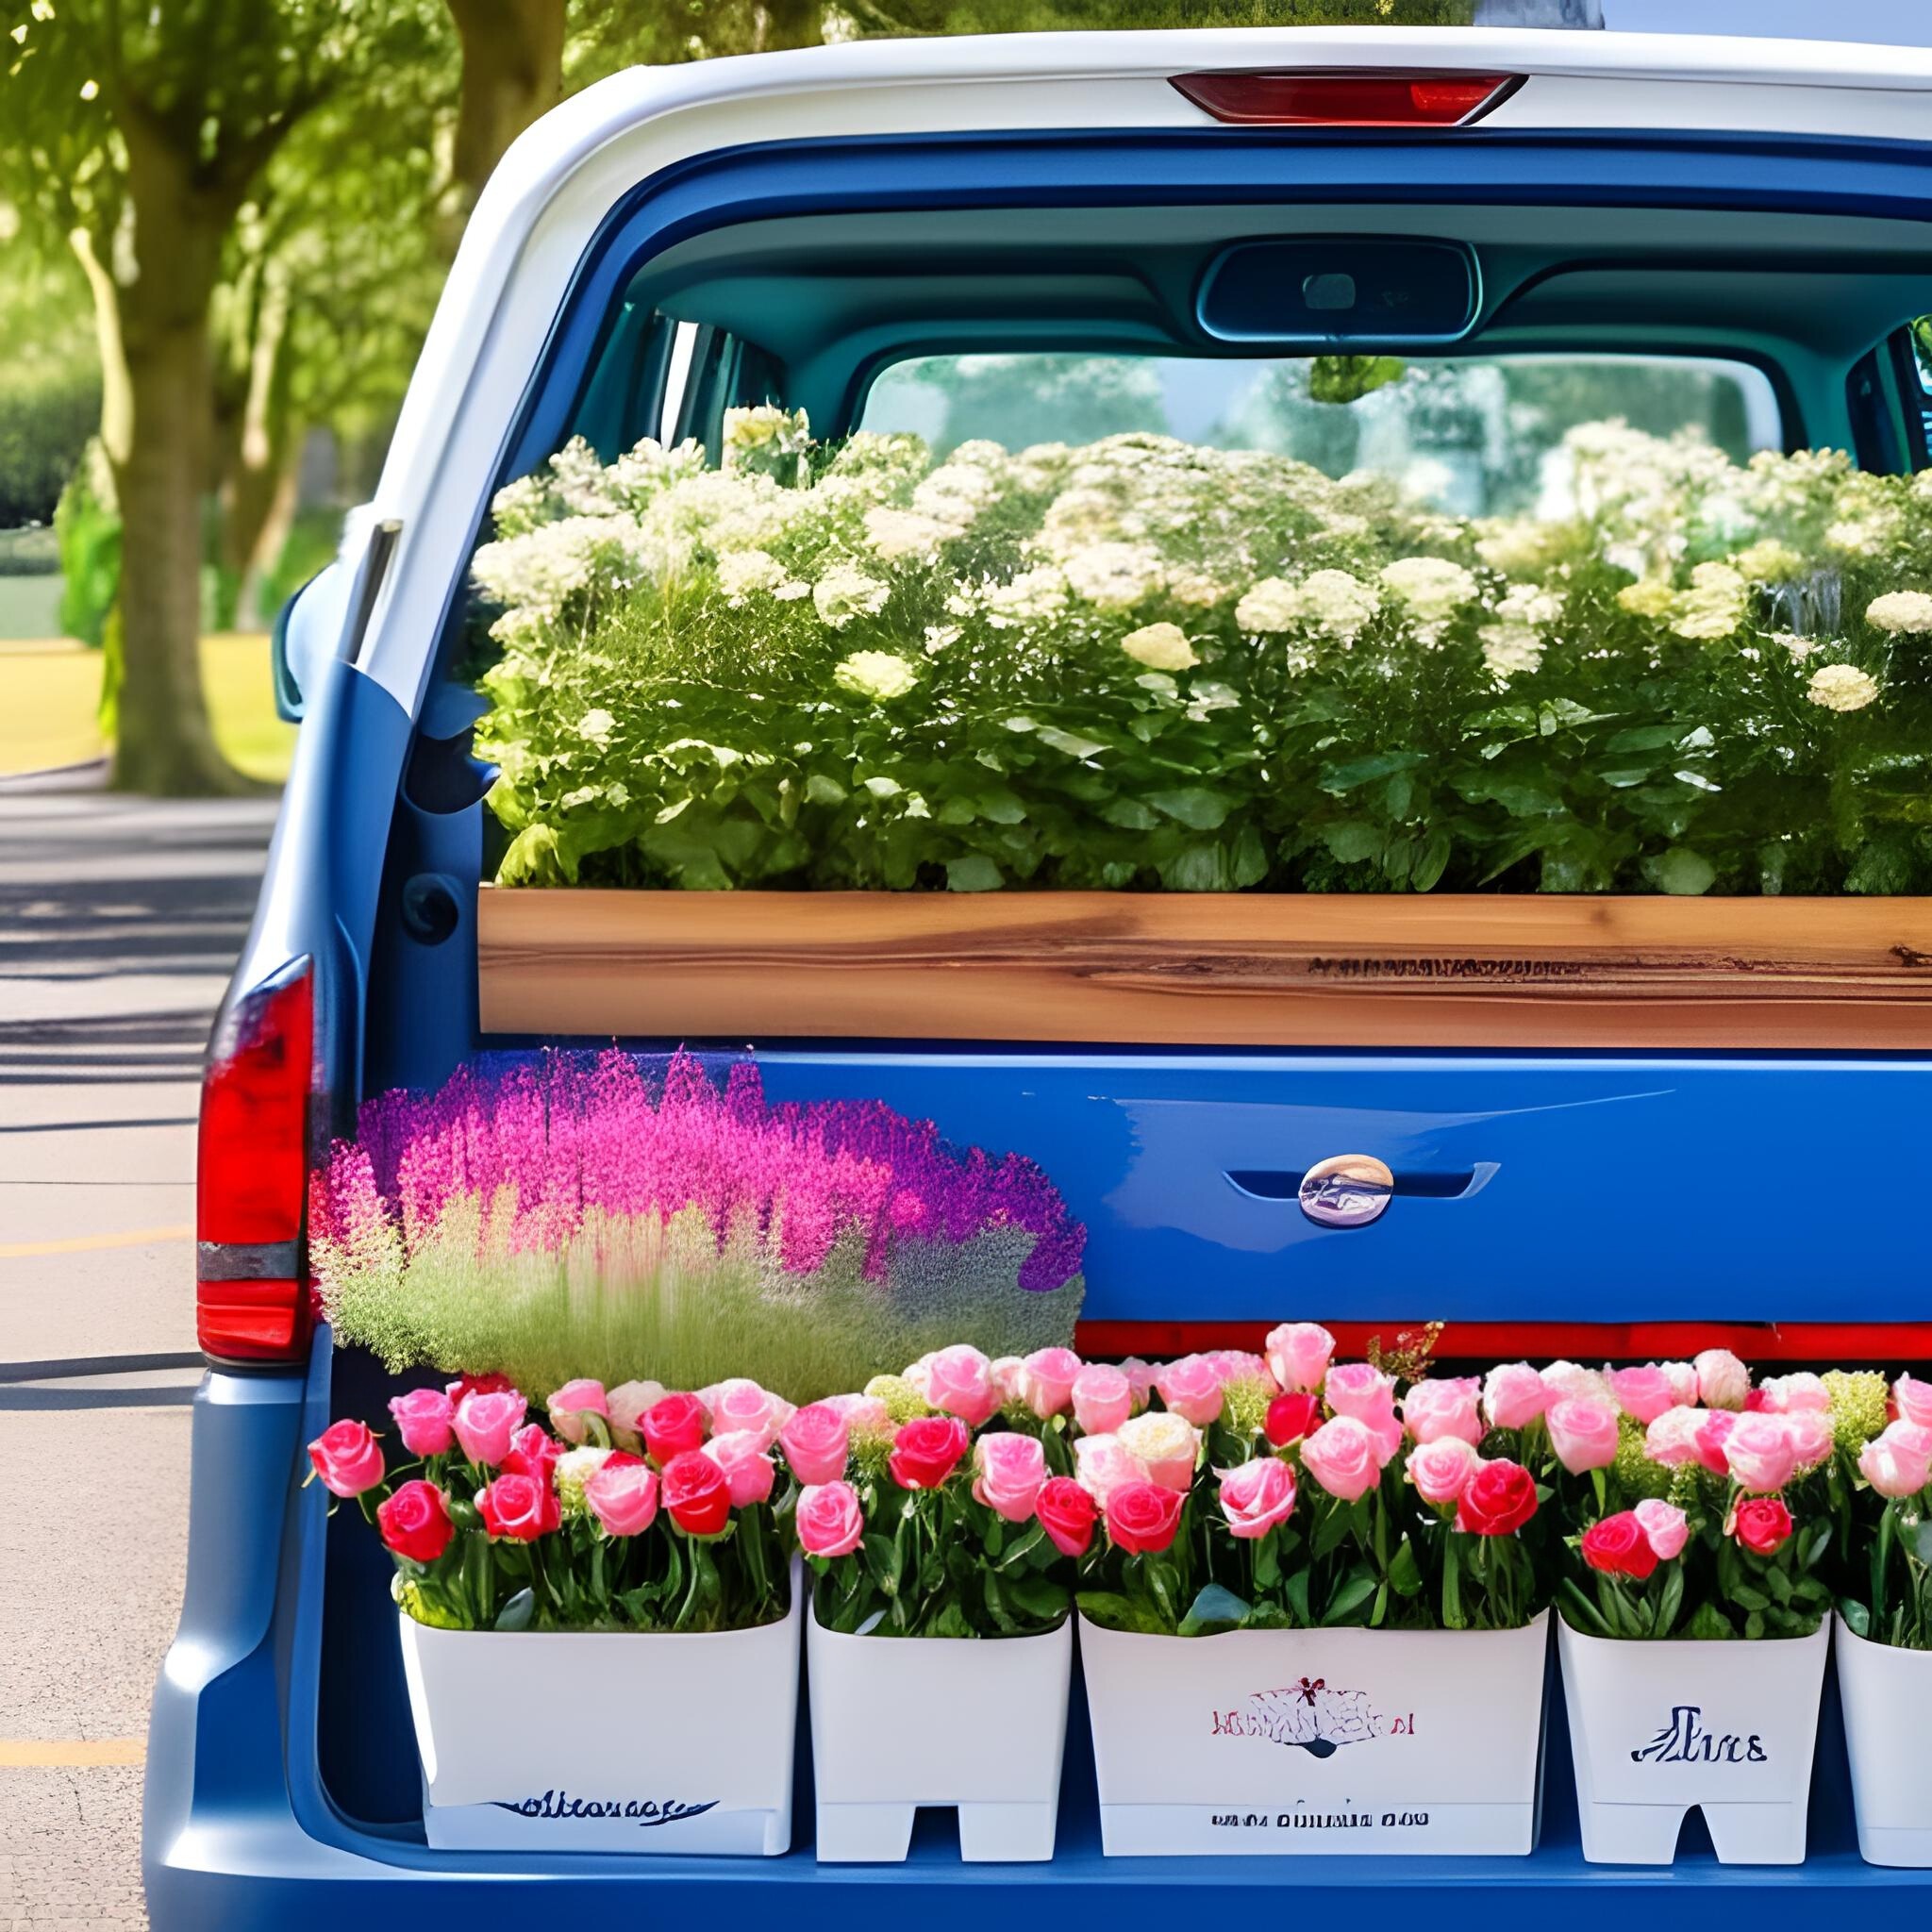 Affordable website audit UK - represented by a van with lots of roses in the back